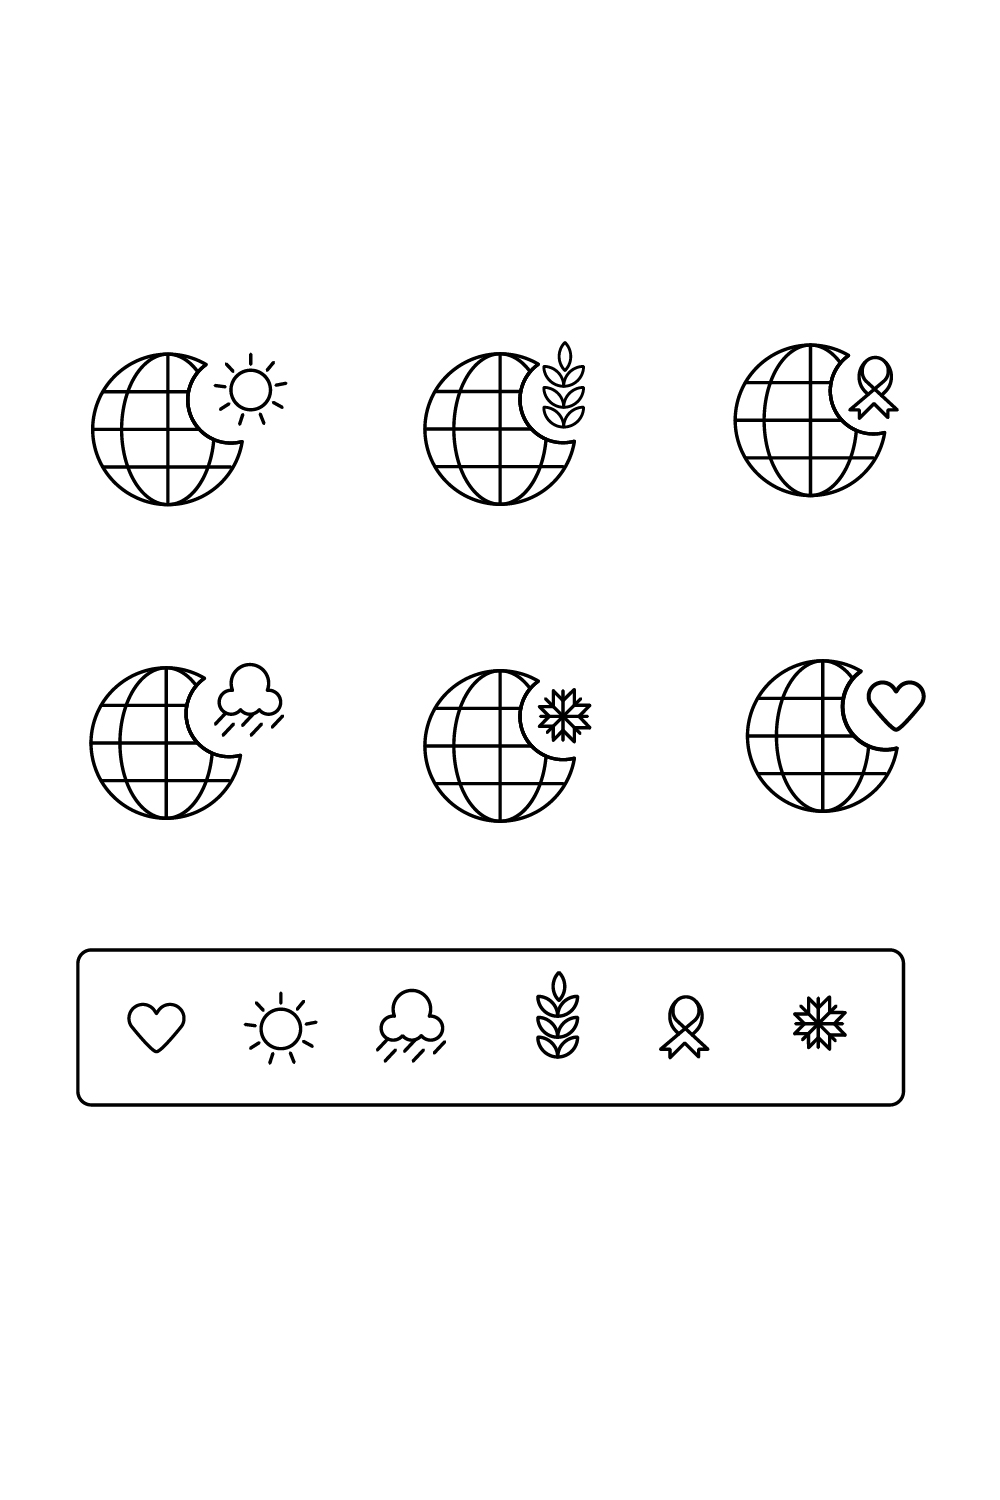 World, sun, chrismas flat illustration icon for your app or web pinterest preview image.